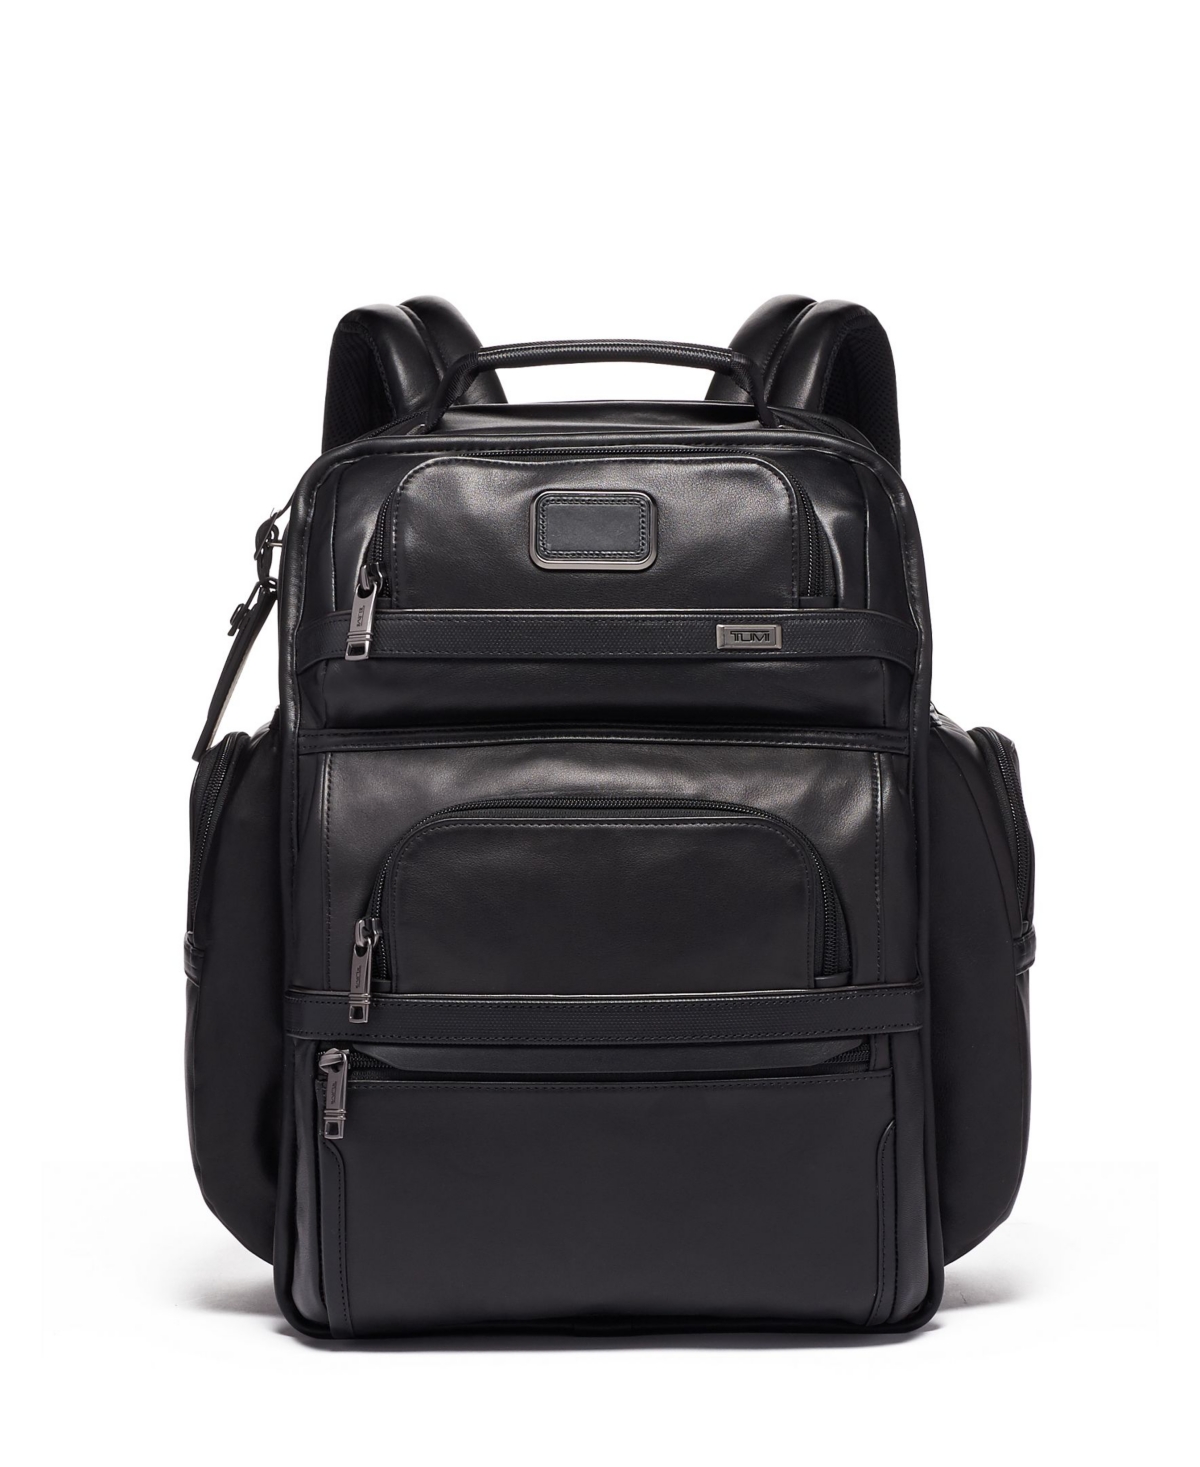 Tumi Alpha 3 Collection Leather Laptop Brief Pack in Black at Nordstrom